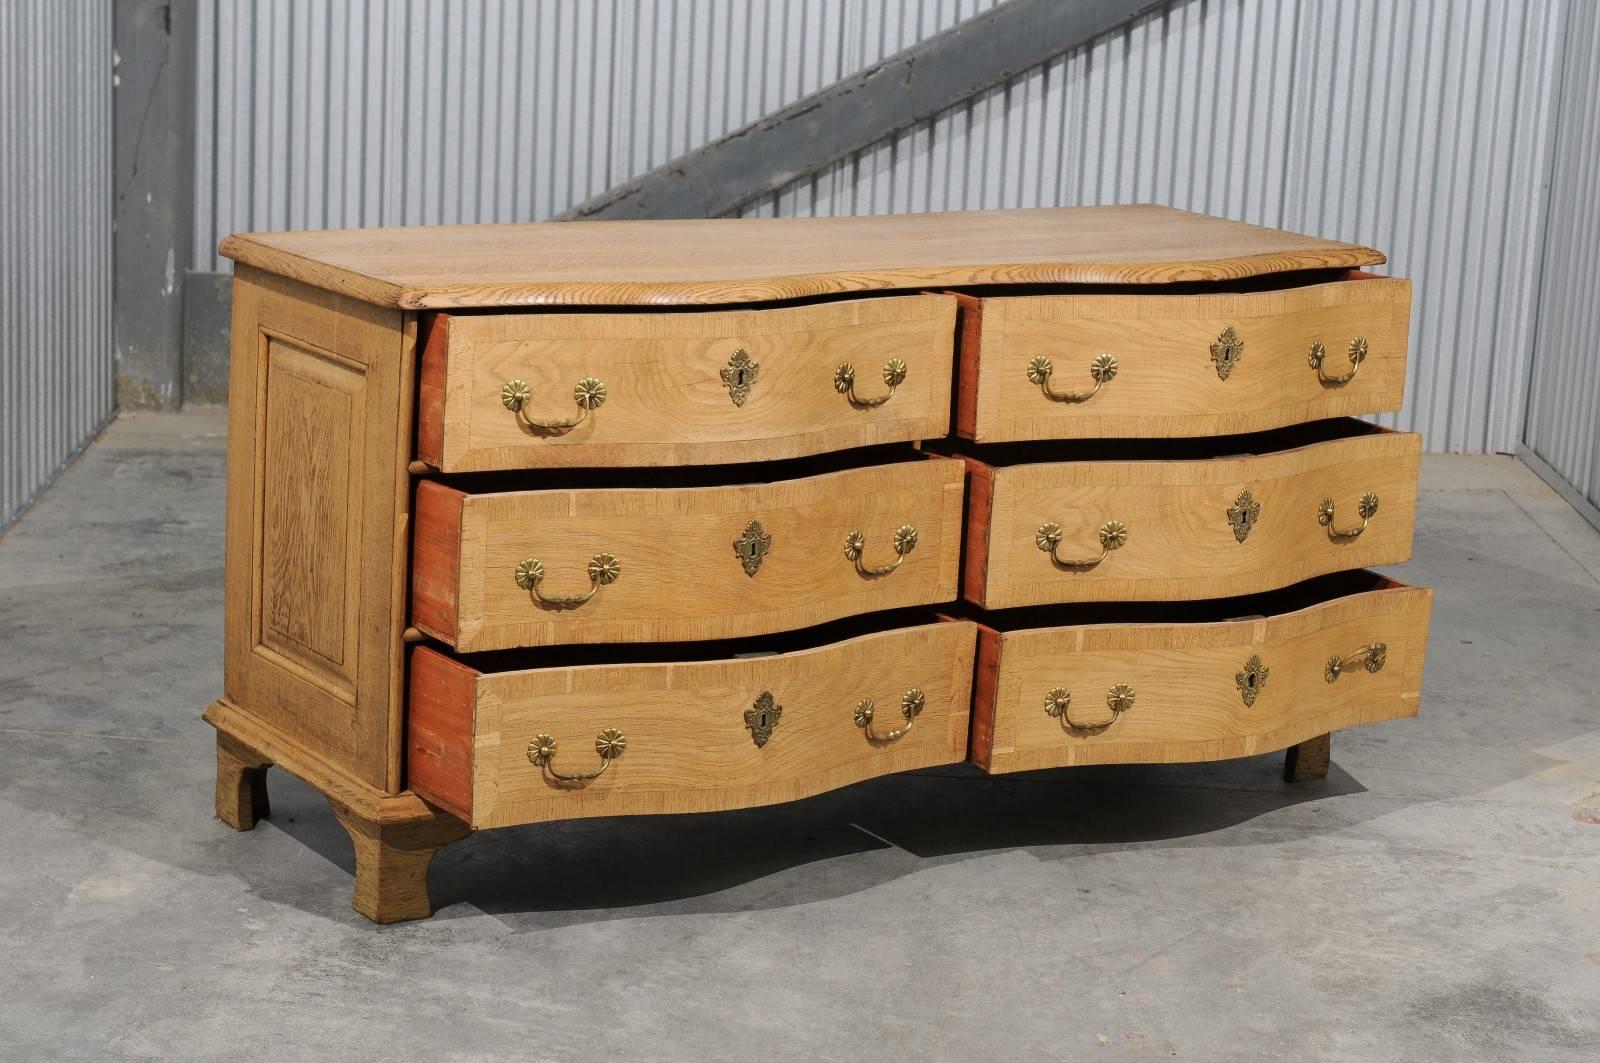 A Swedish bleached wood dresser with serpentine front and double side of drawers from the mid-19th century. This Swedish long chest features a shaped top with beveled edges over a serpentine front made of six drawers. Separated by a series of wooden